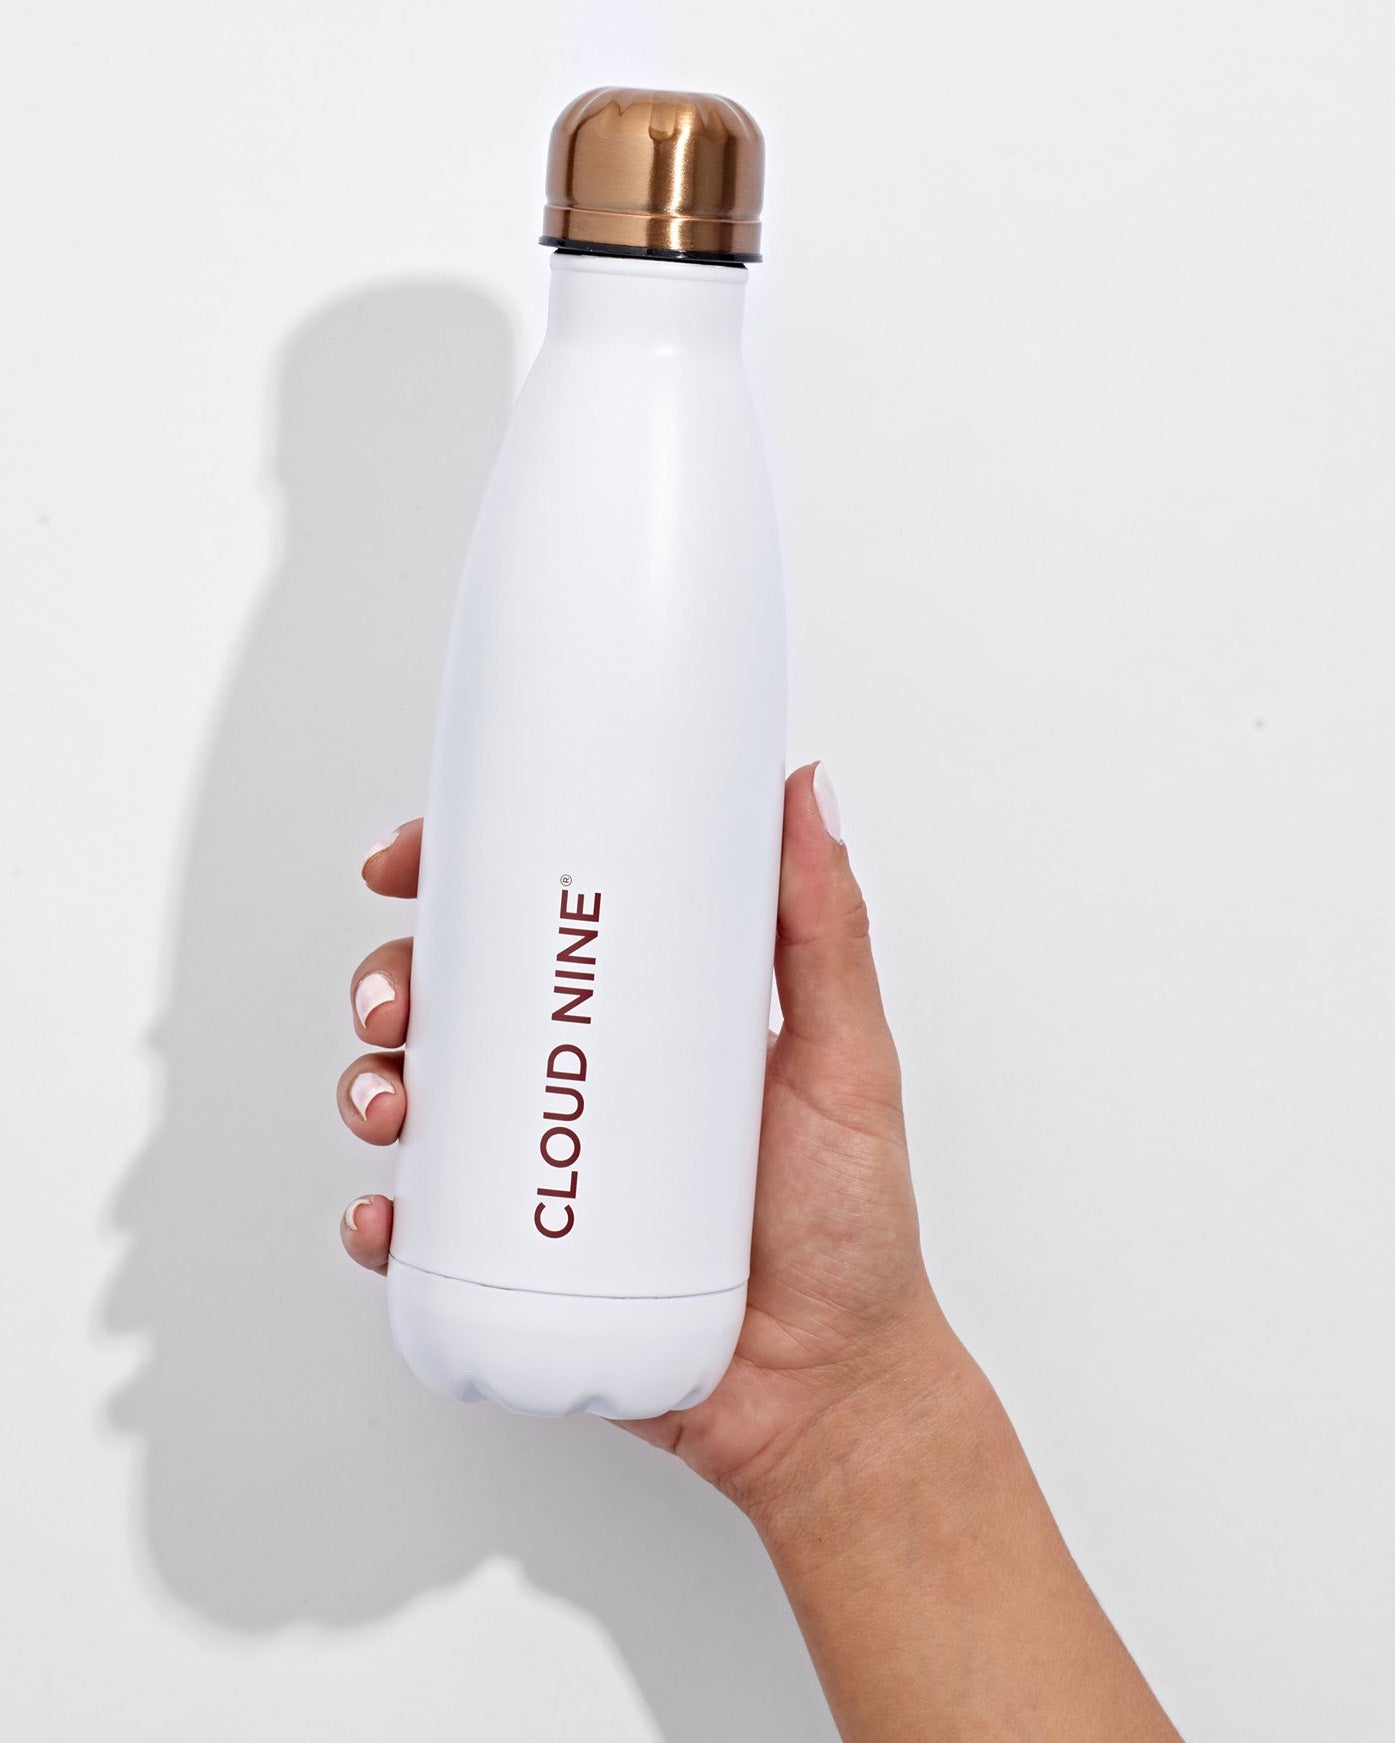 A hand holding up a white CLOUD NINE reusable water bottle against a white background.